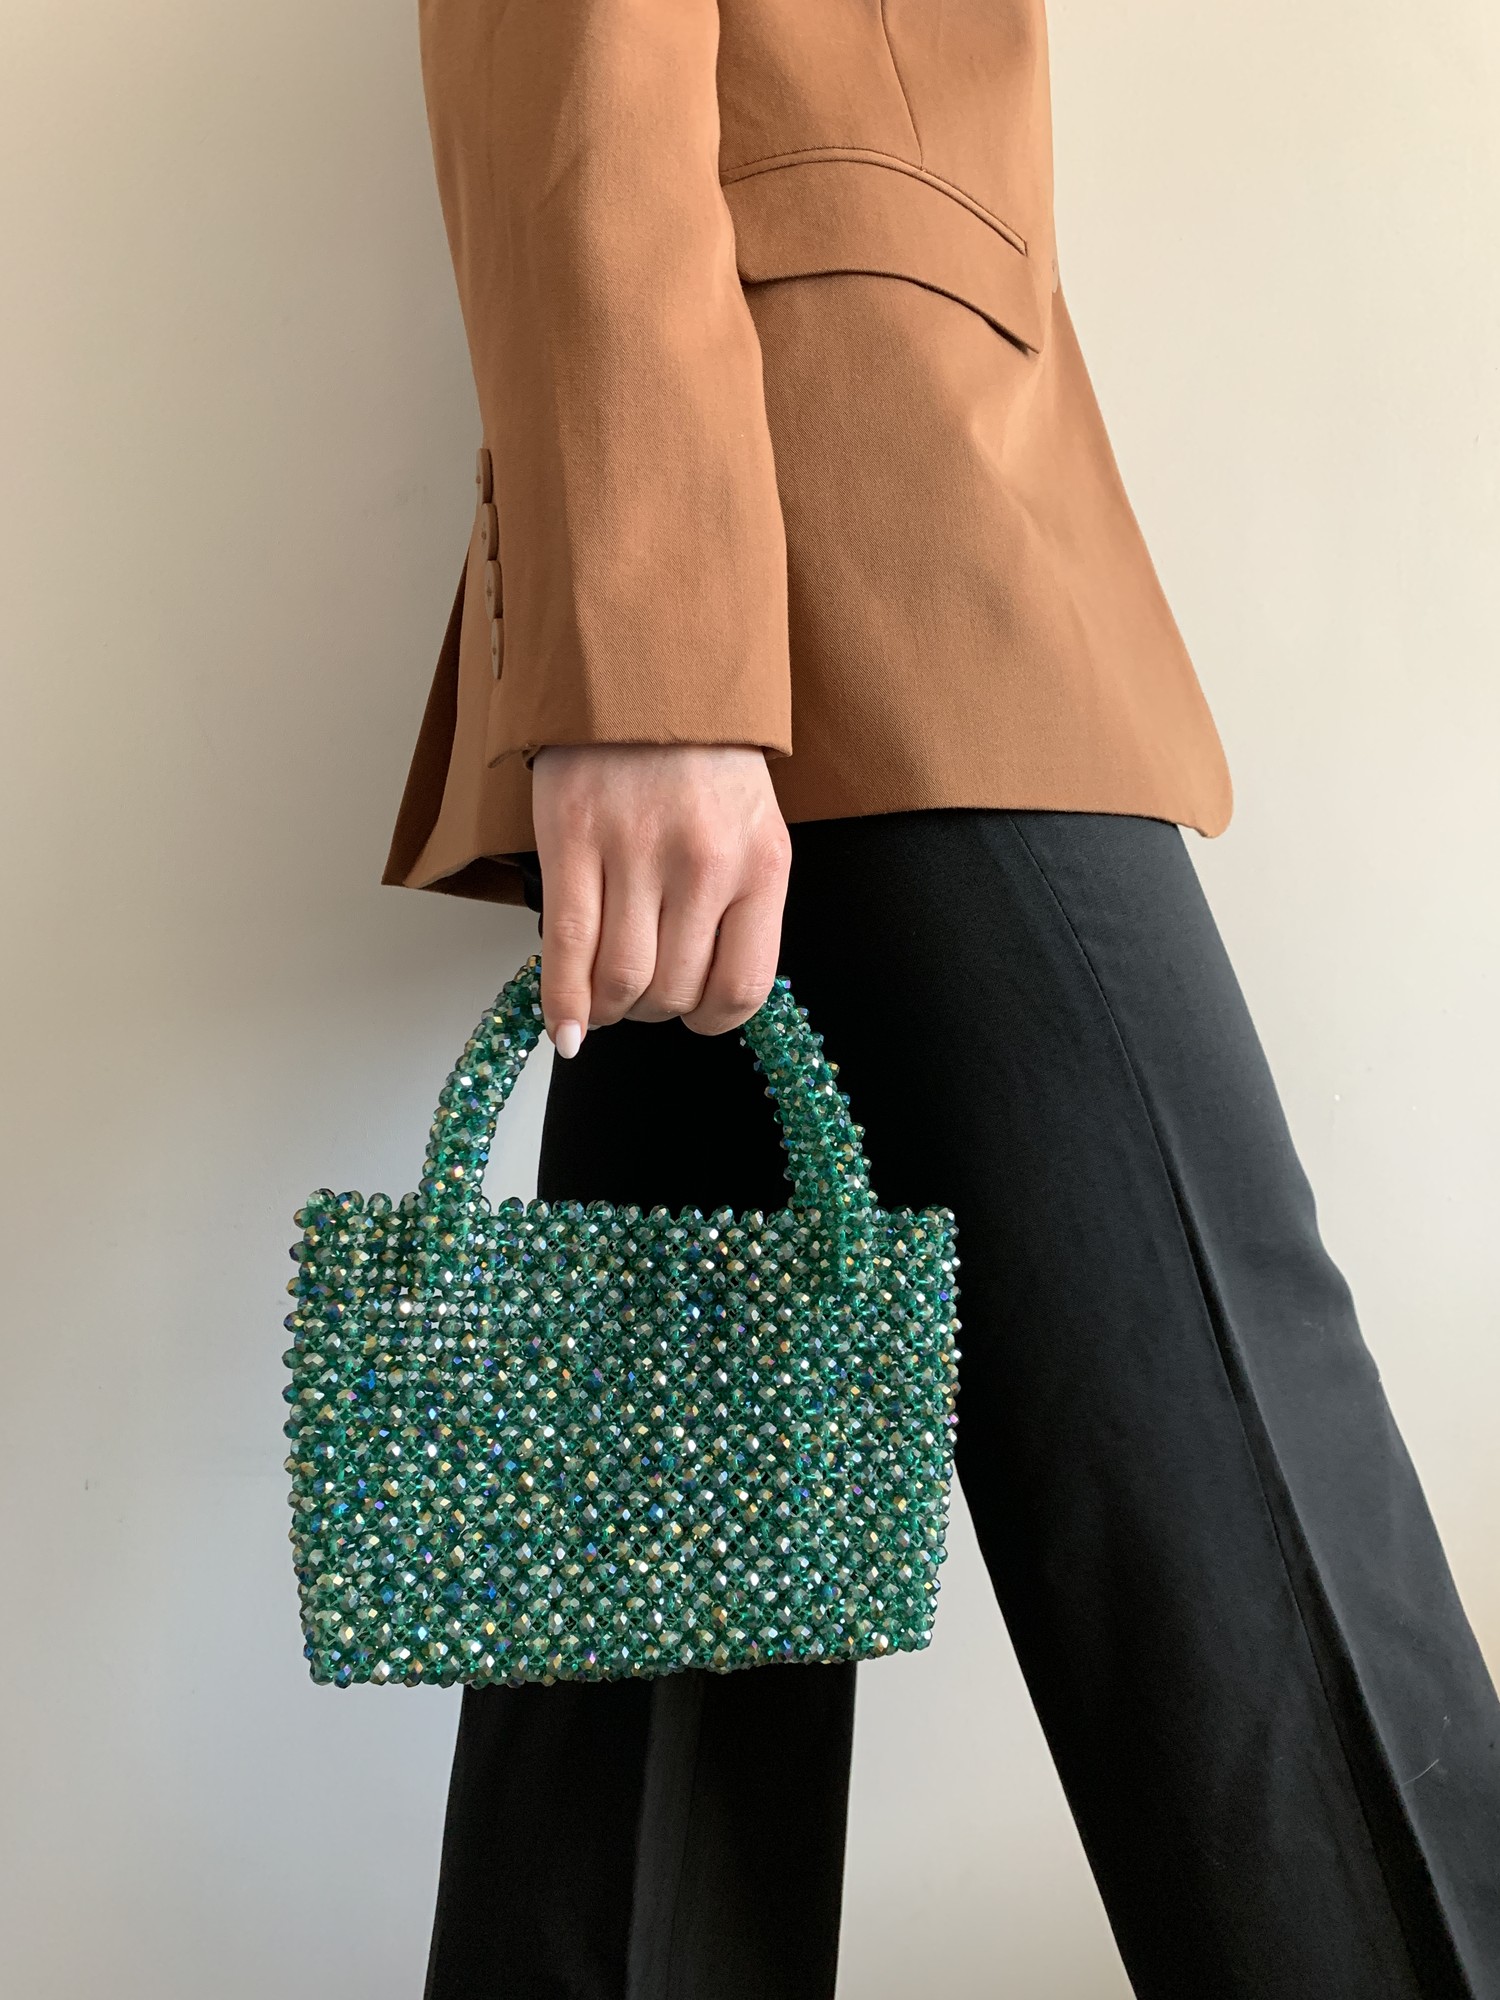 Classic green bag made of crystal beads